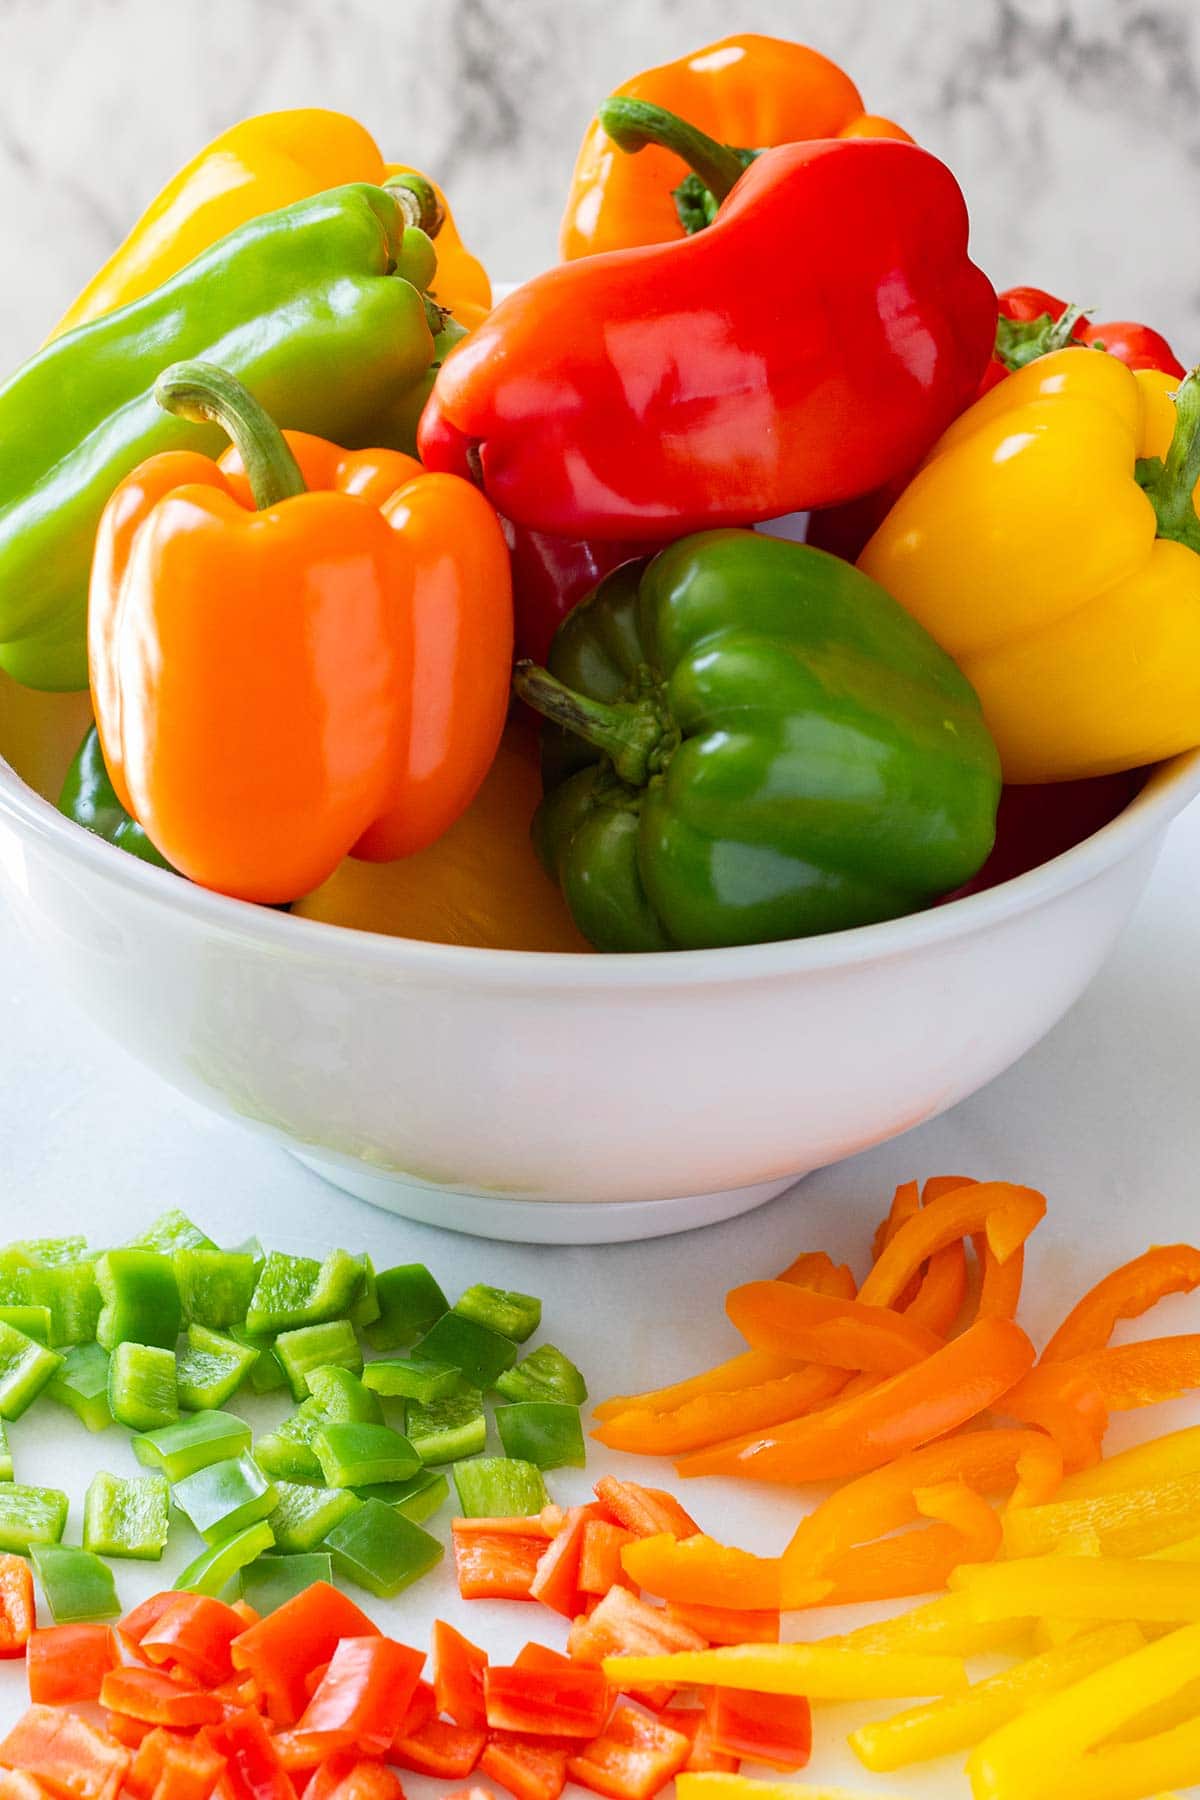 Bowl of bell peppers with sliced and diced bell peppers on counter in front.